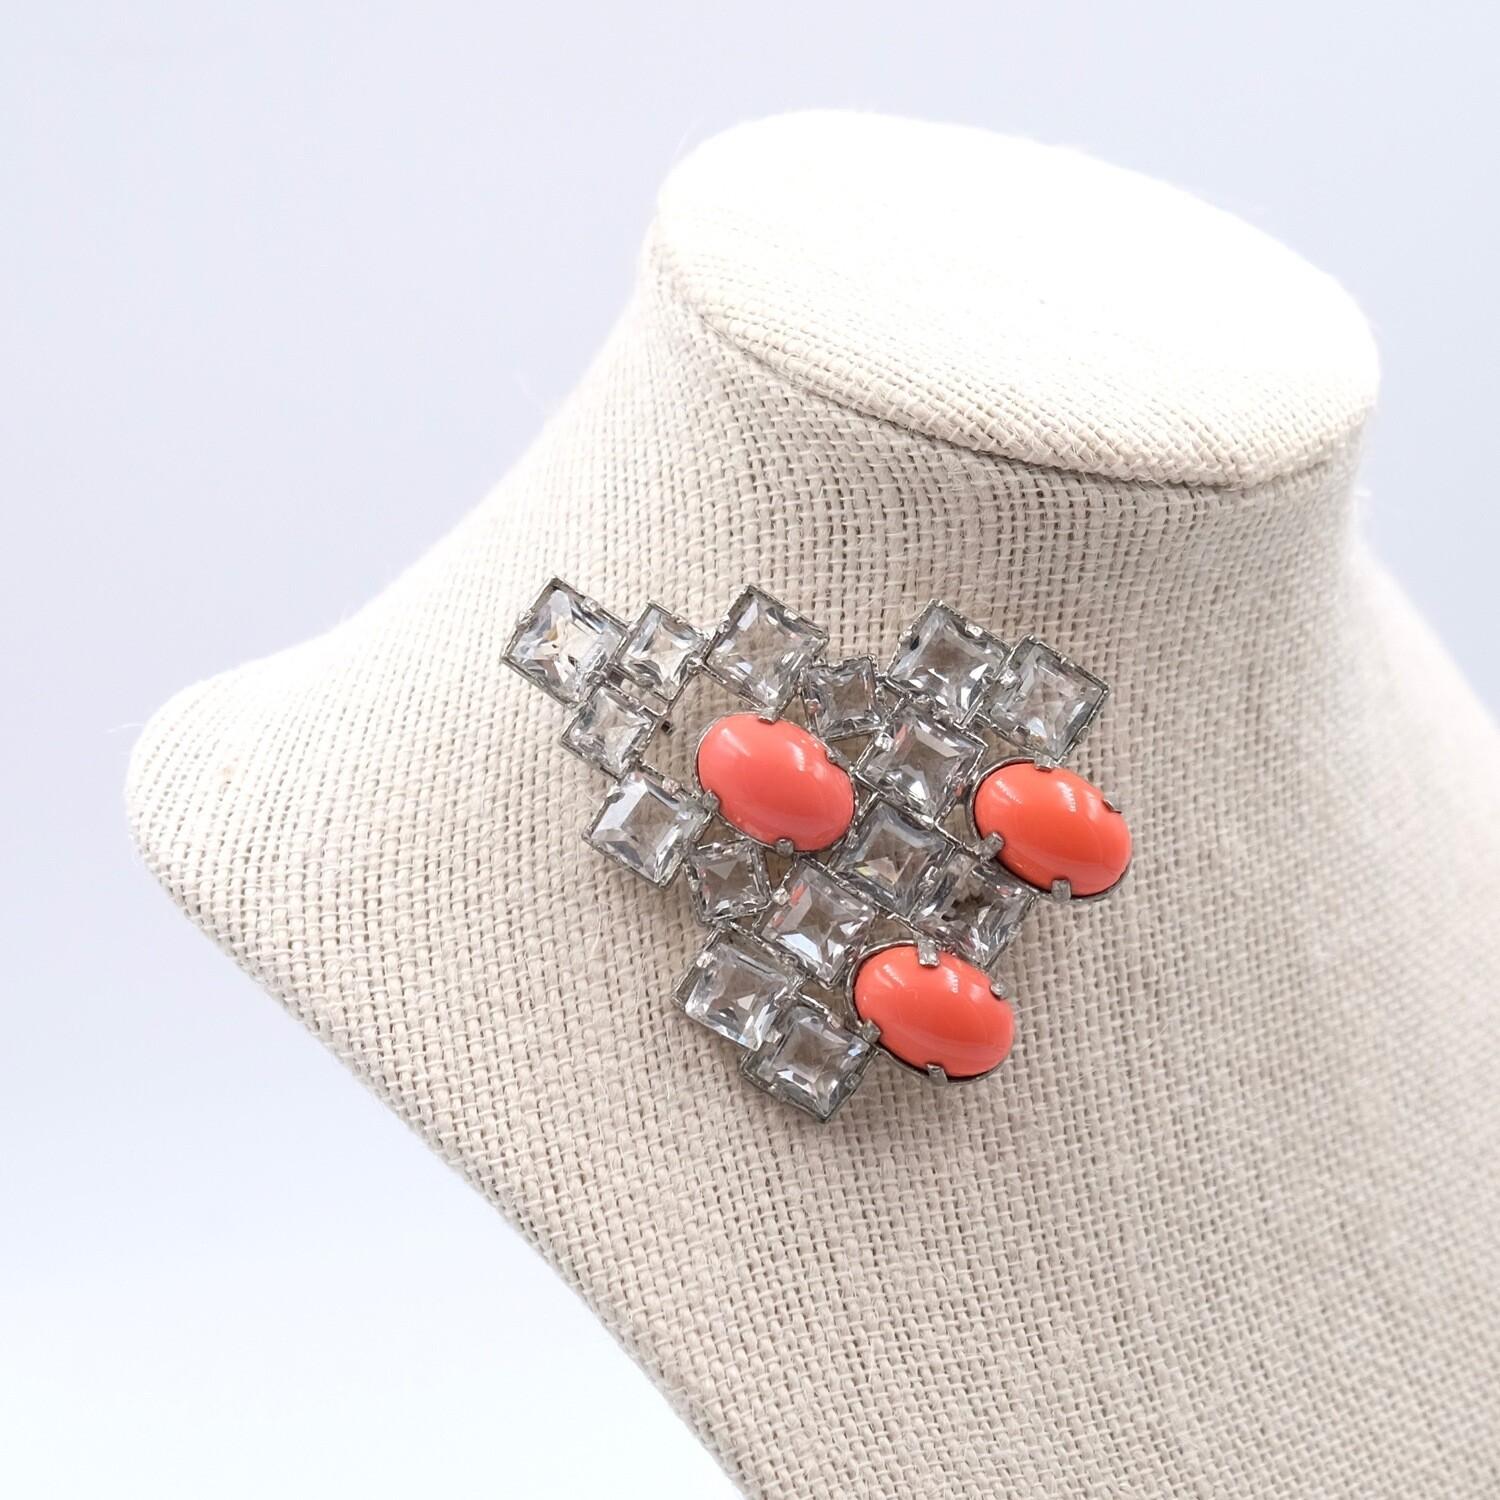 Year: 1930
Hallmark: -
Dimensions: W 2.36 in
Materials: base metal, crystals, faux coral